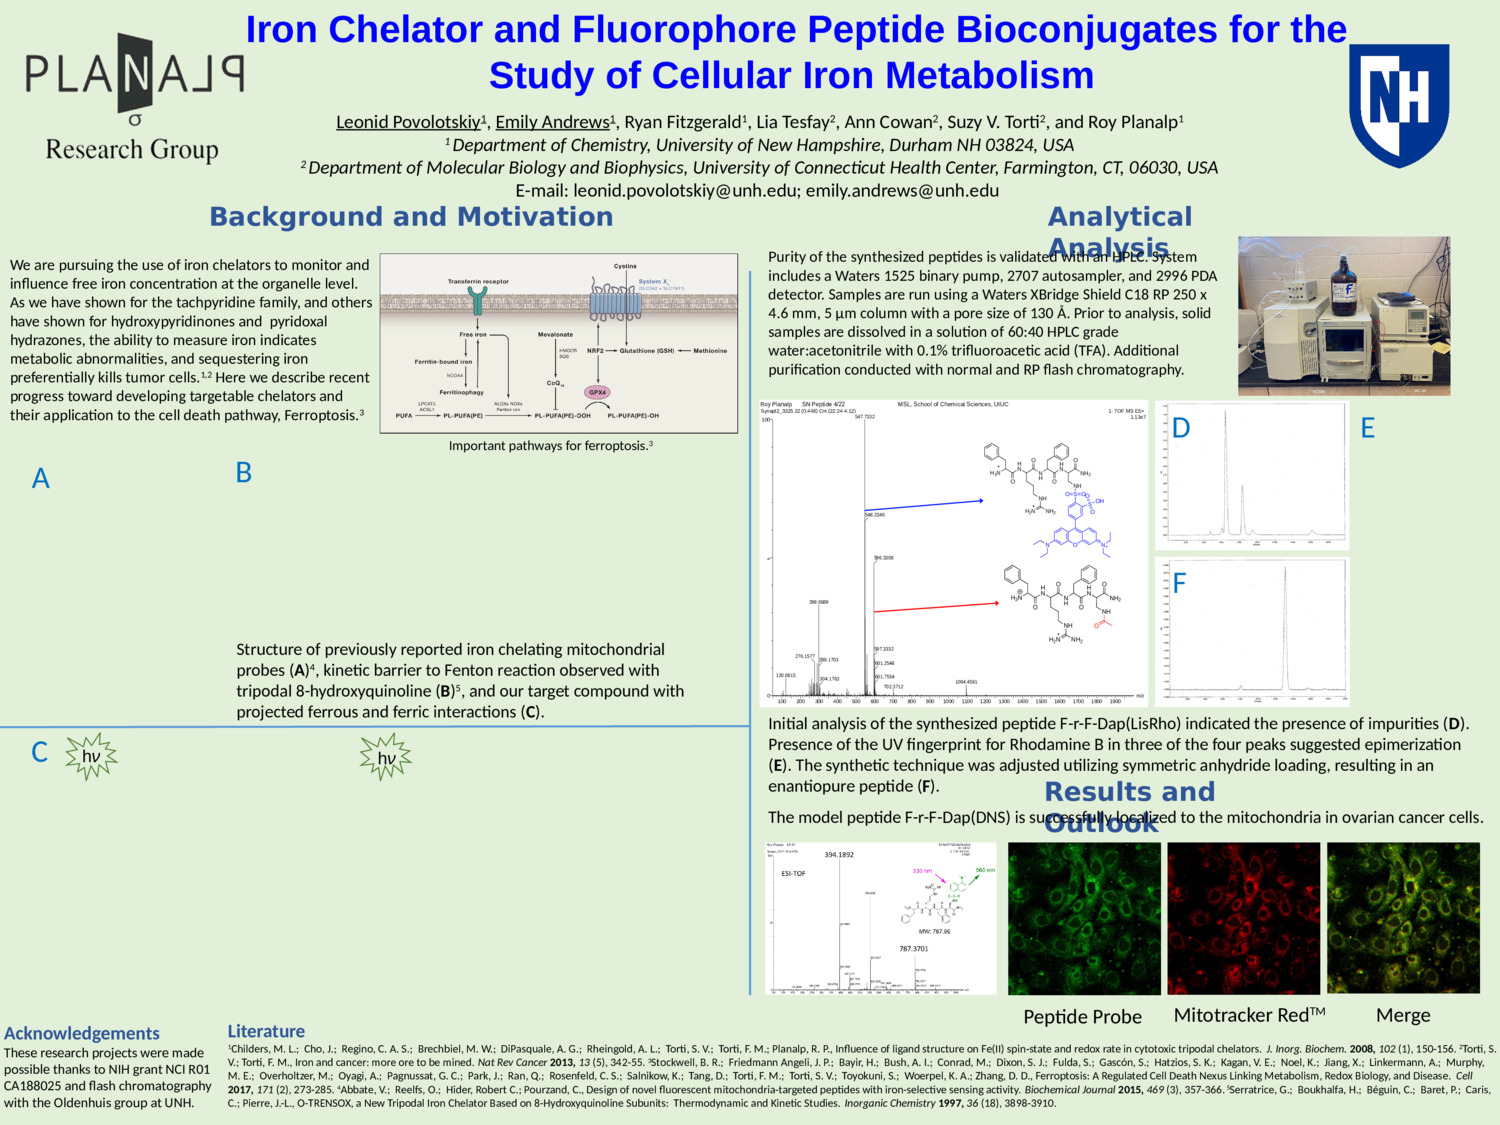 Iron Chelator And Fluorophore Peptide Bioconjugates For The Study Of Cellular Iron Metabolism by lp2005